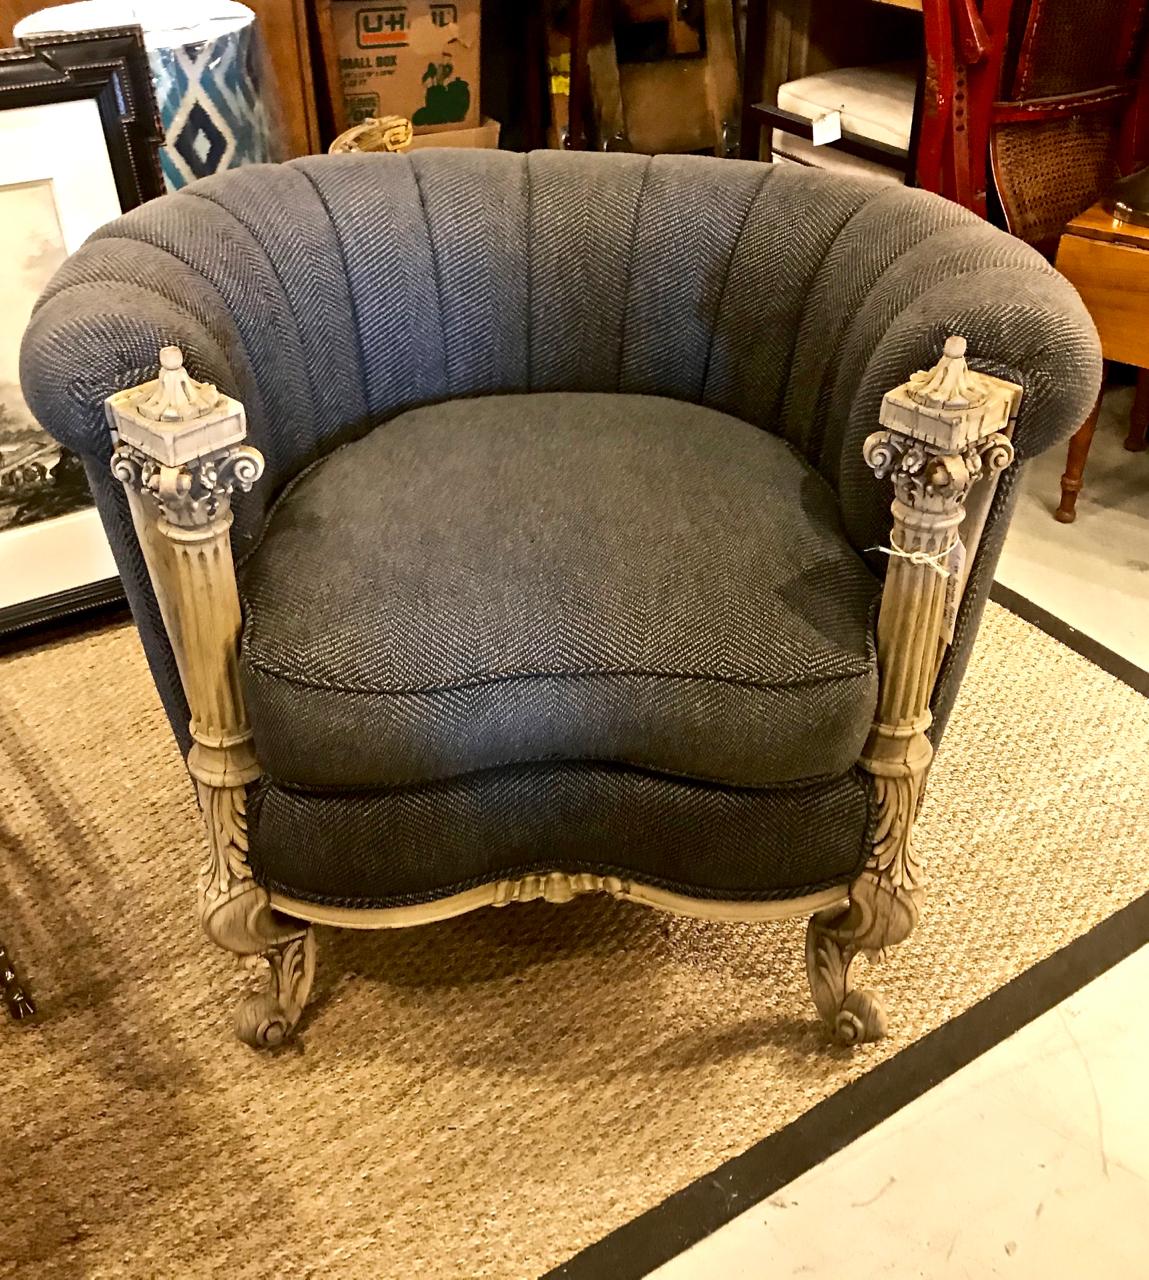 This is a unique late 19th-early 20th century carved mahogany barrel-back chair that is newly upholstered in a Kravet herringbone tweed. The springs have been retied; the channeling and cushion are down-filled. The Corinthian Column meets